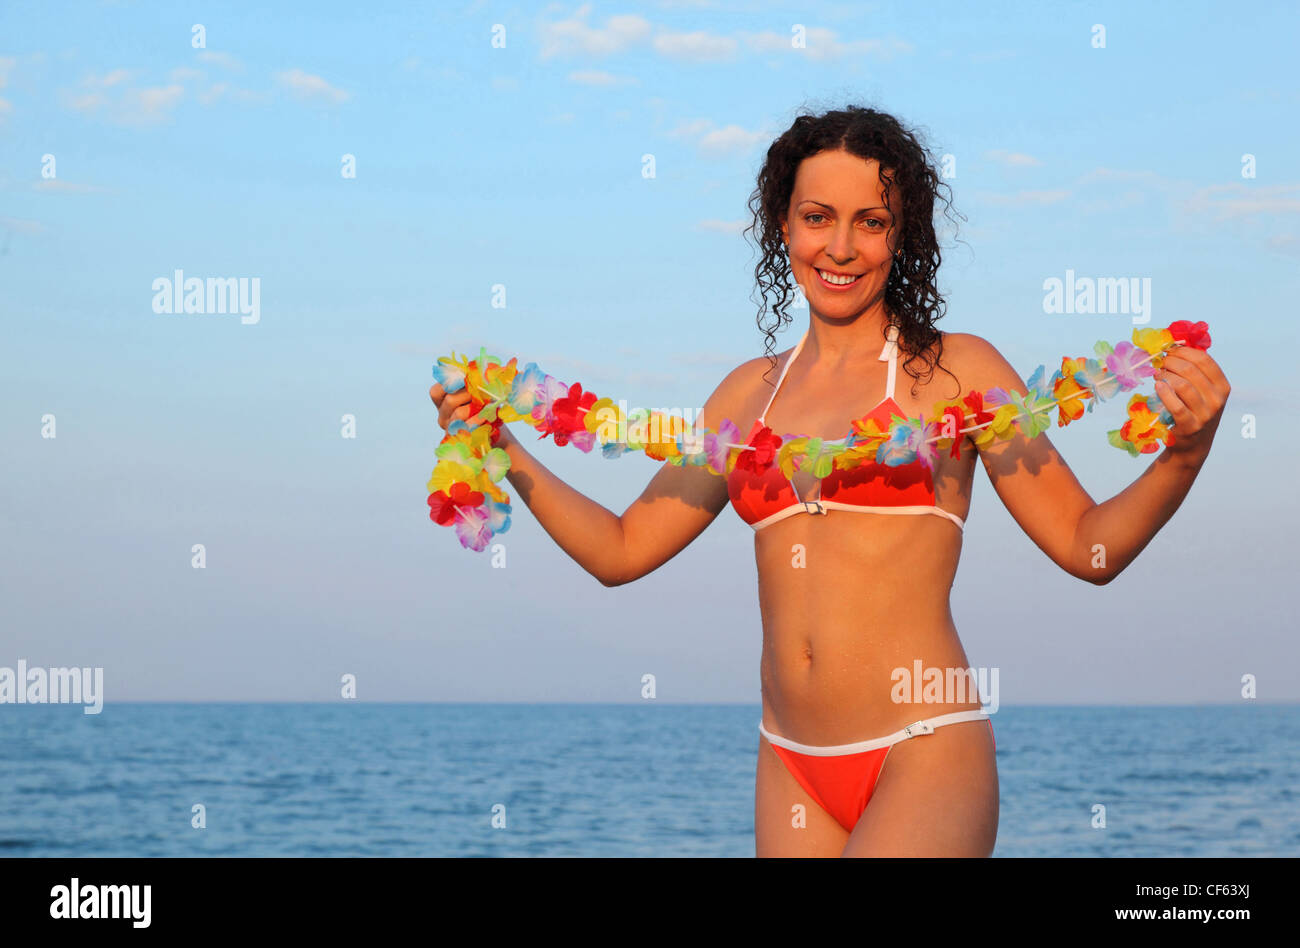 beautiful young woman dressed in bathing suit holding garland of hawaiian flower and stands on beach Stock Photo